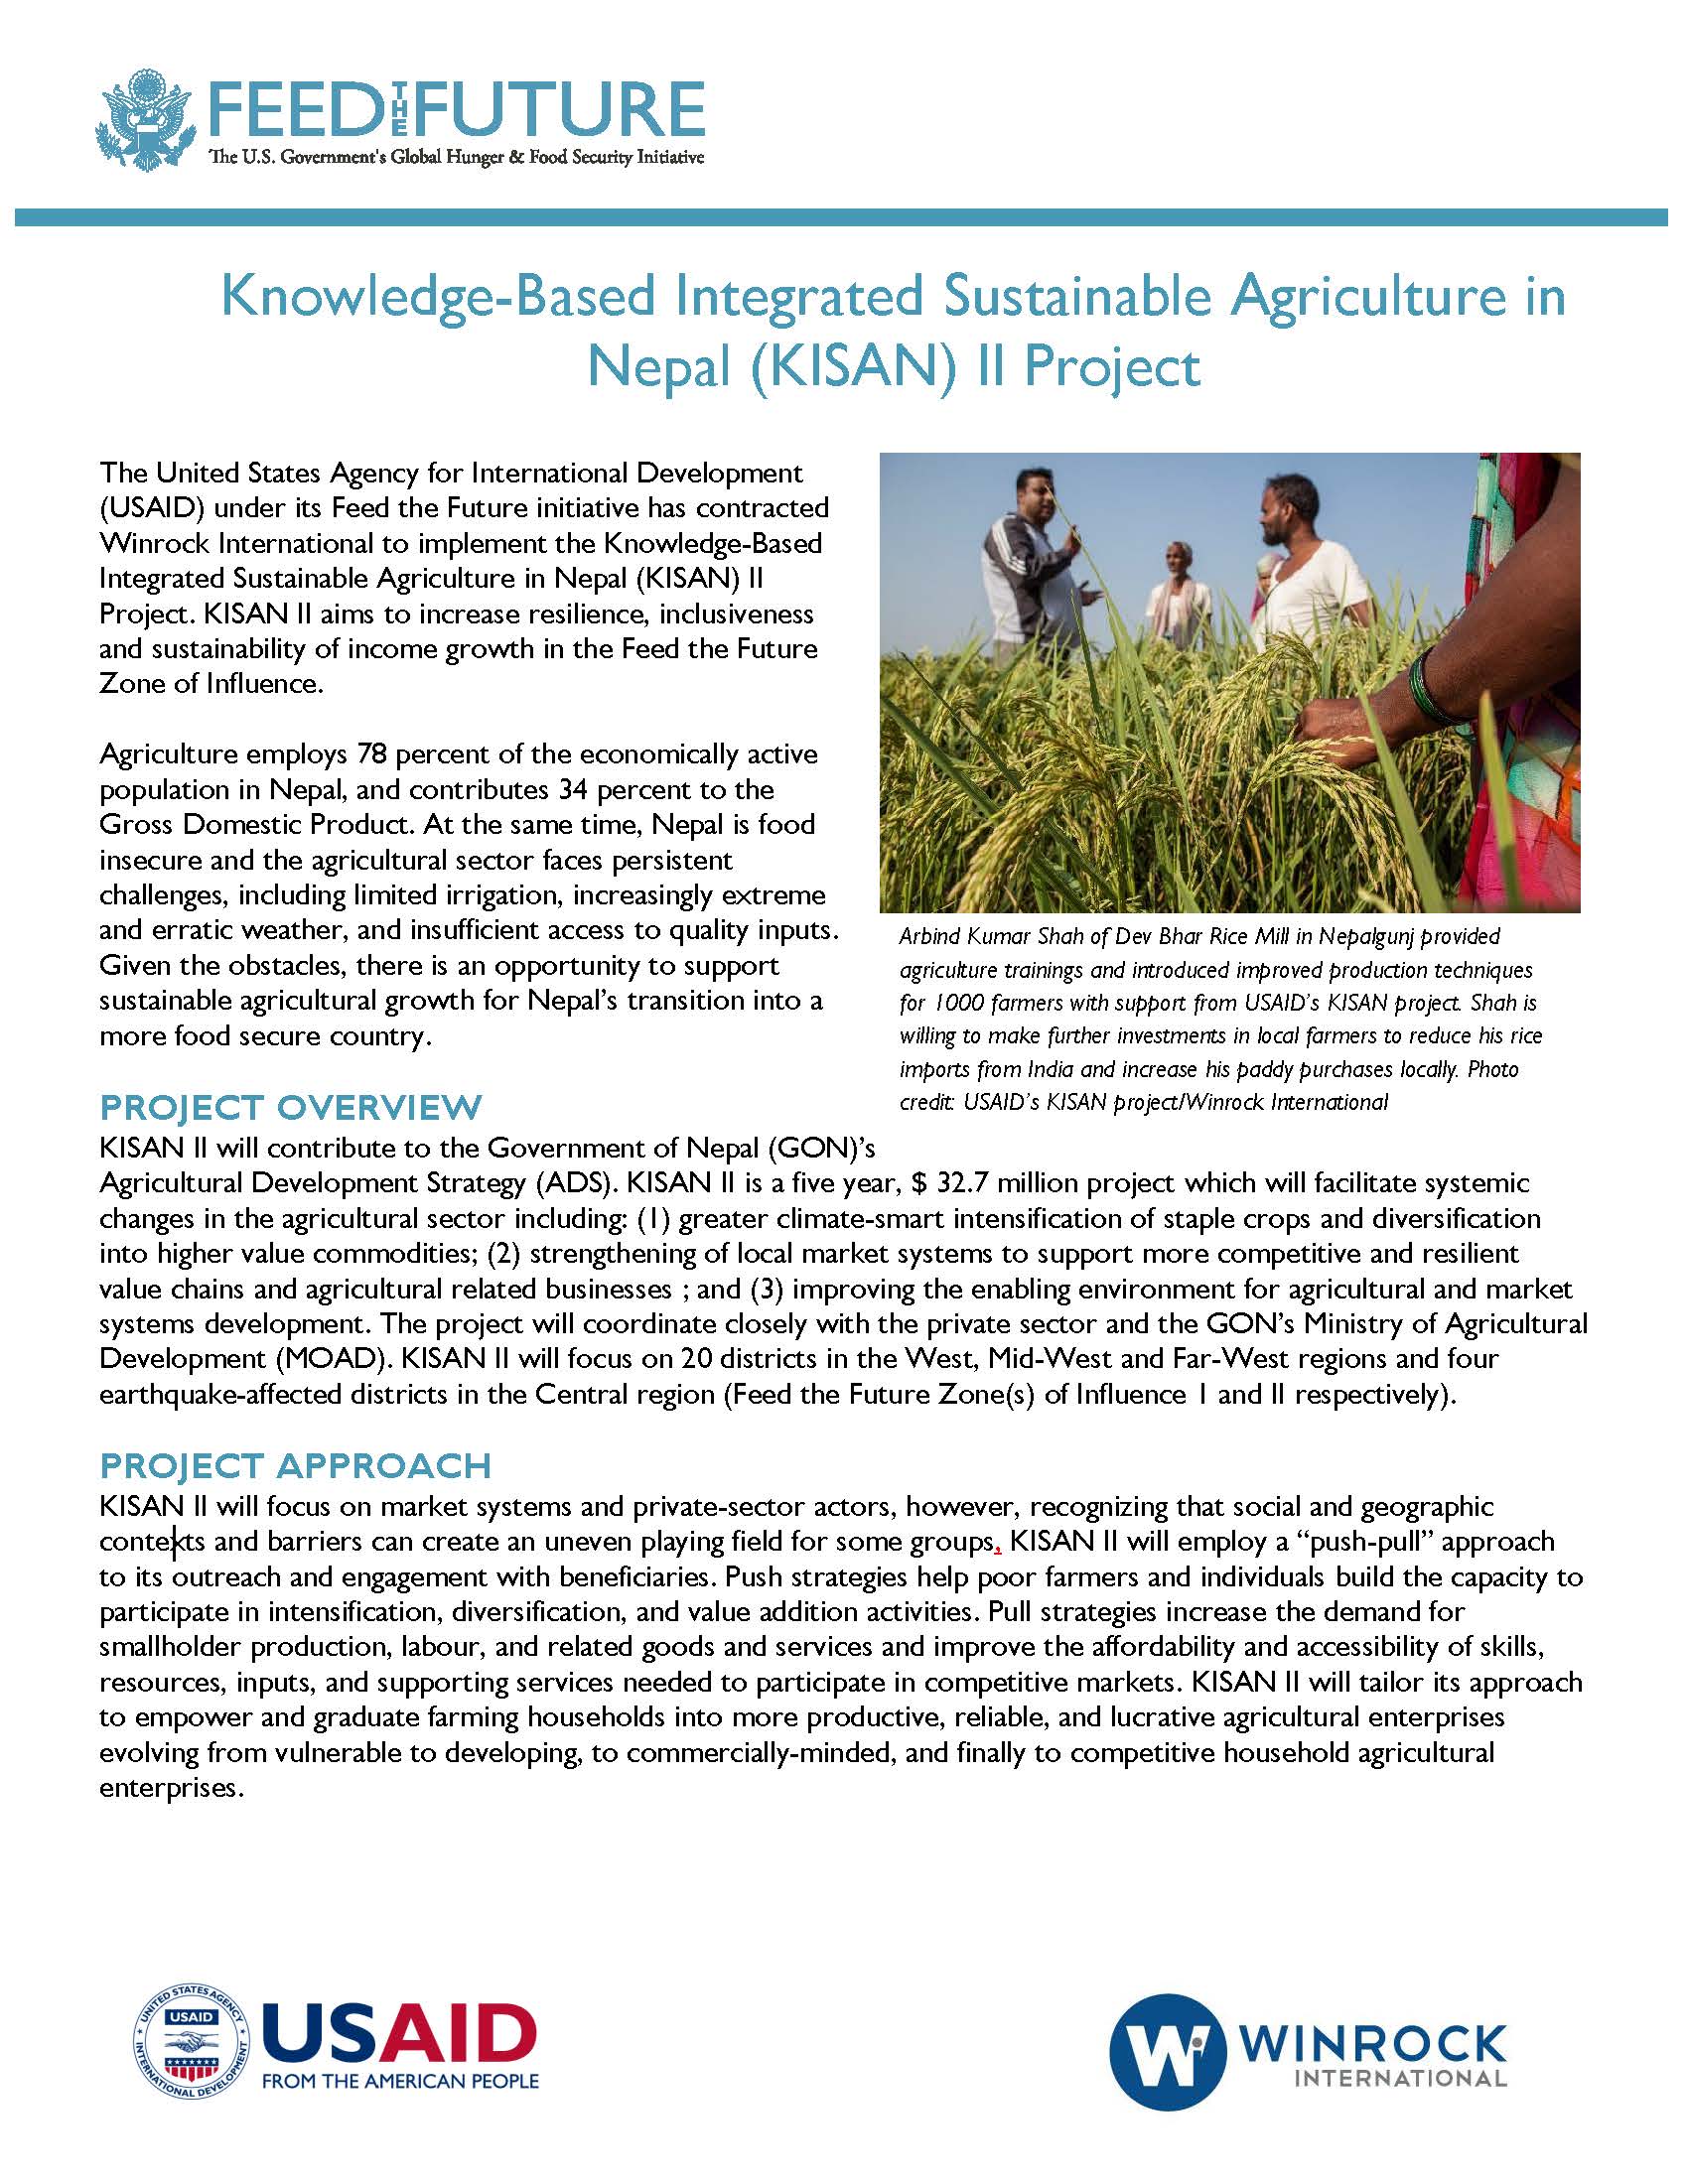 FACT SHEET: Knowledge-based Integrated Sustainable Agriculture and Nutrition (KISAN) II Project